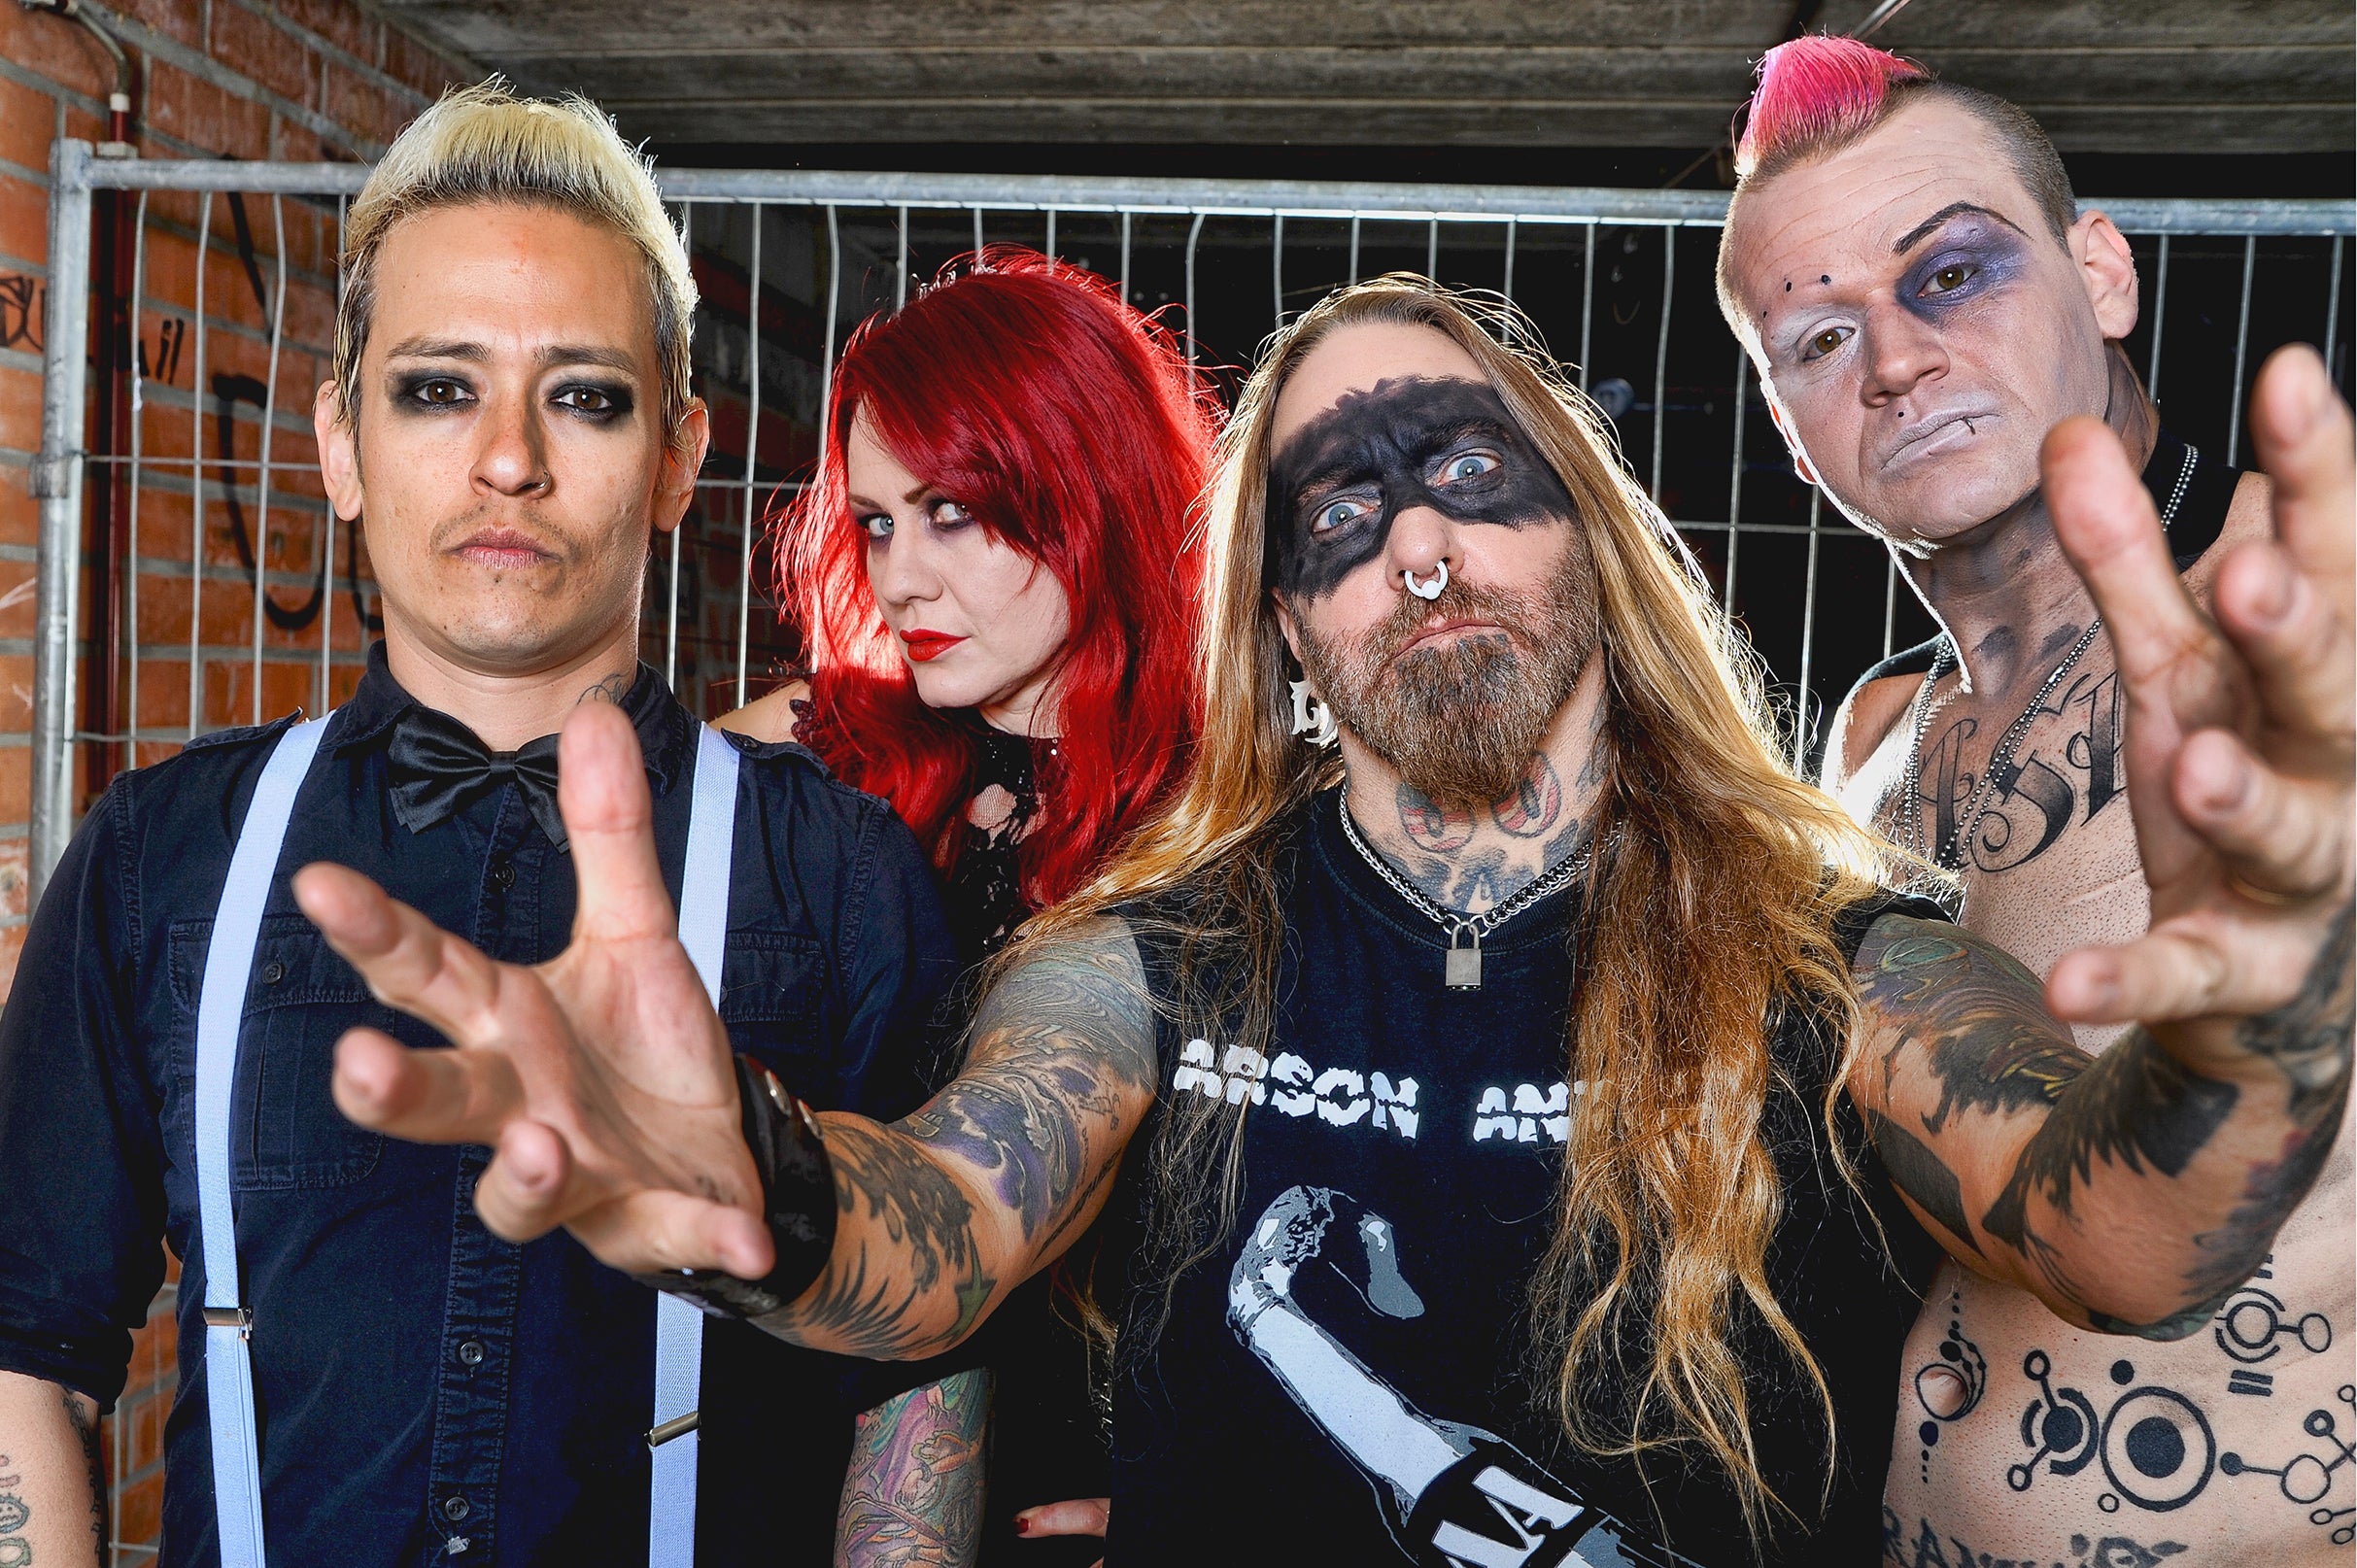 COAL CHAMBER with special guests Fear Factory, Twiztid, Wednesday 13, and Black Satellite